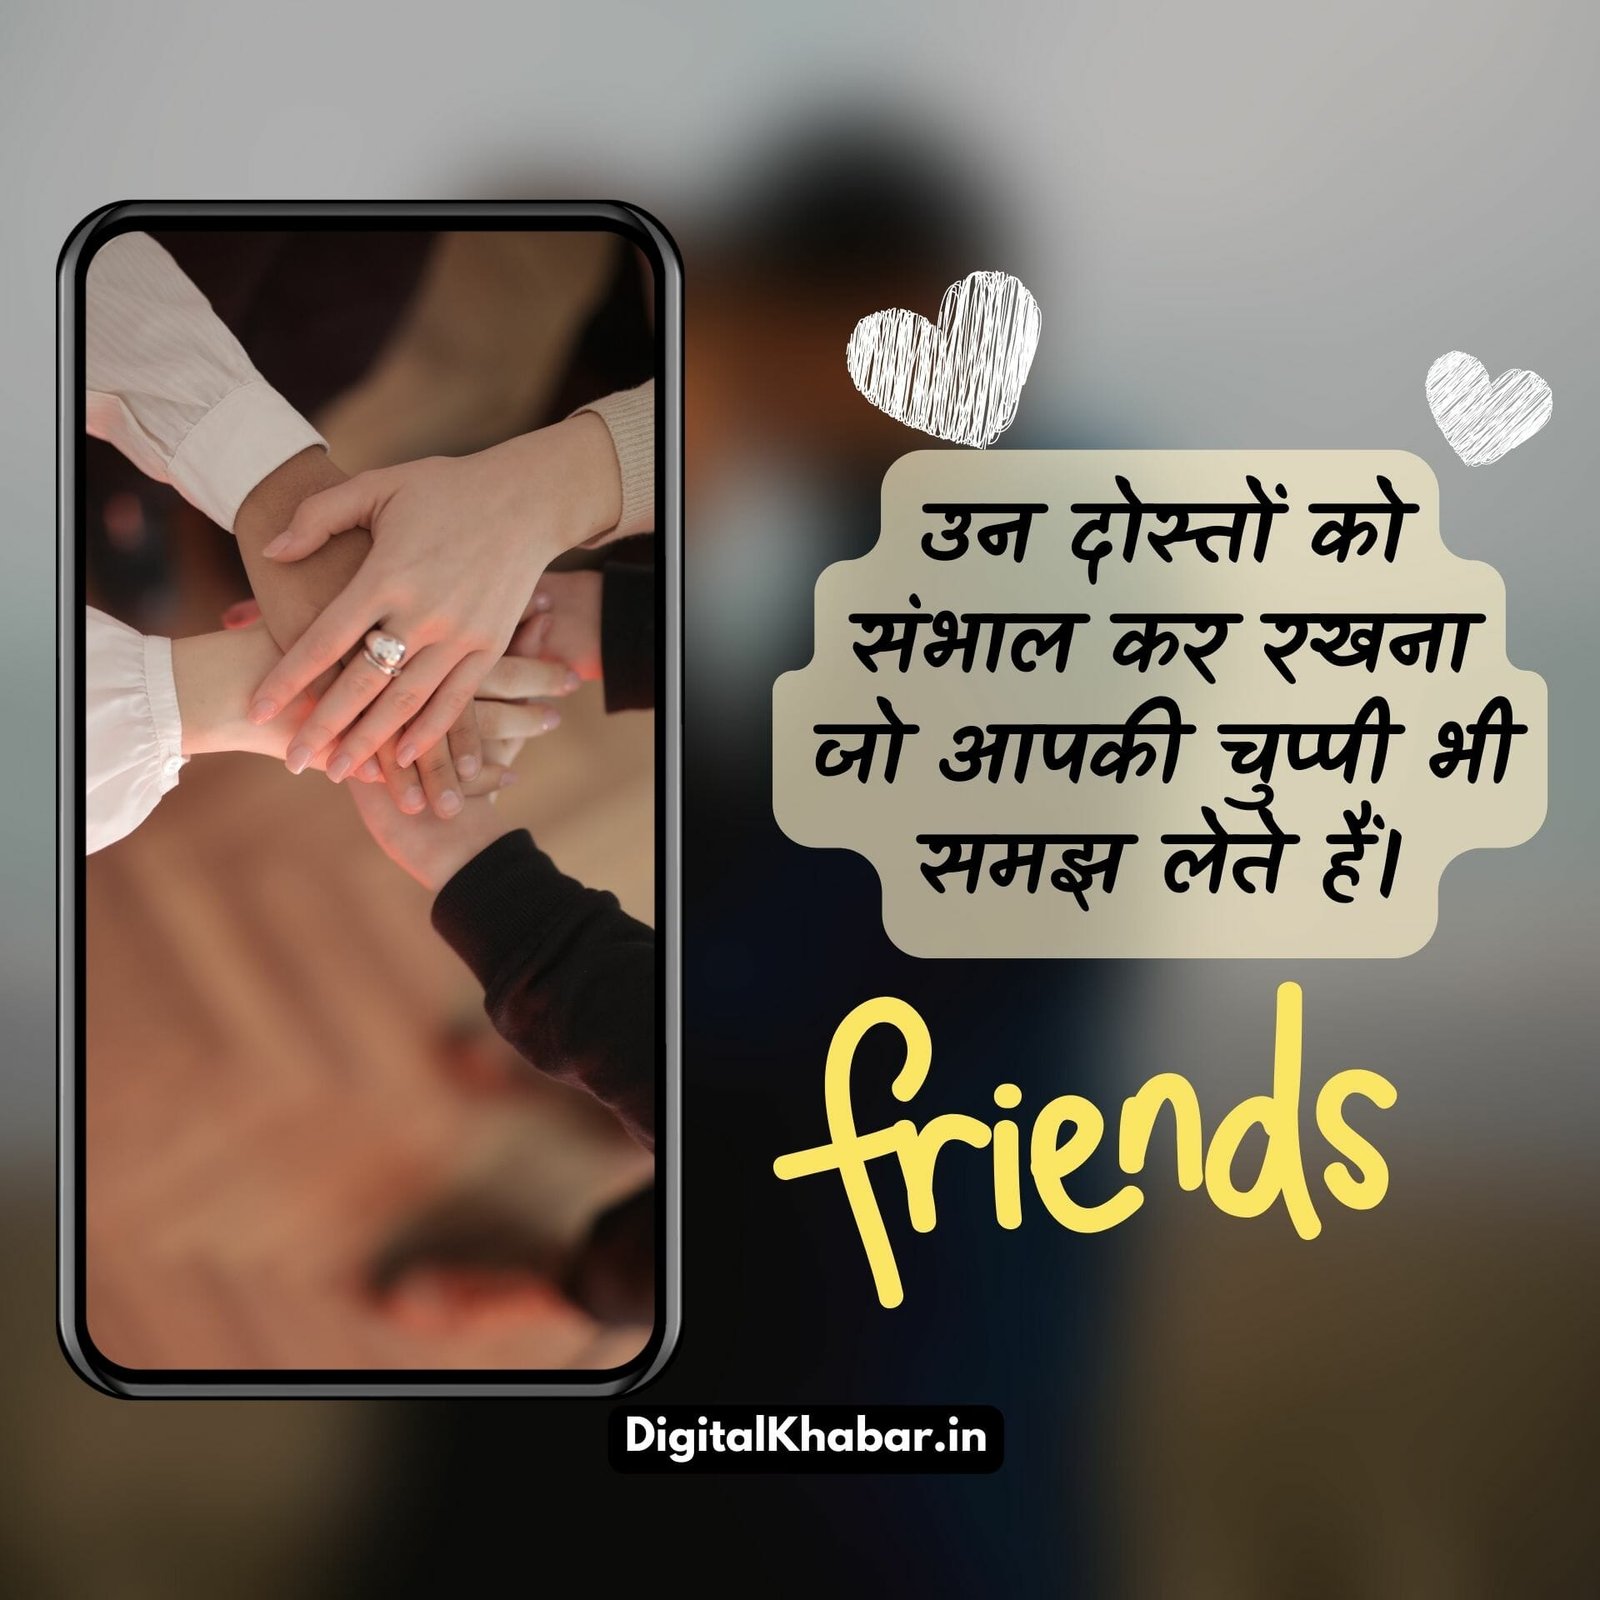 beautiful quotes on friendship love and life in hindi